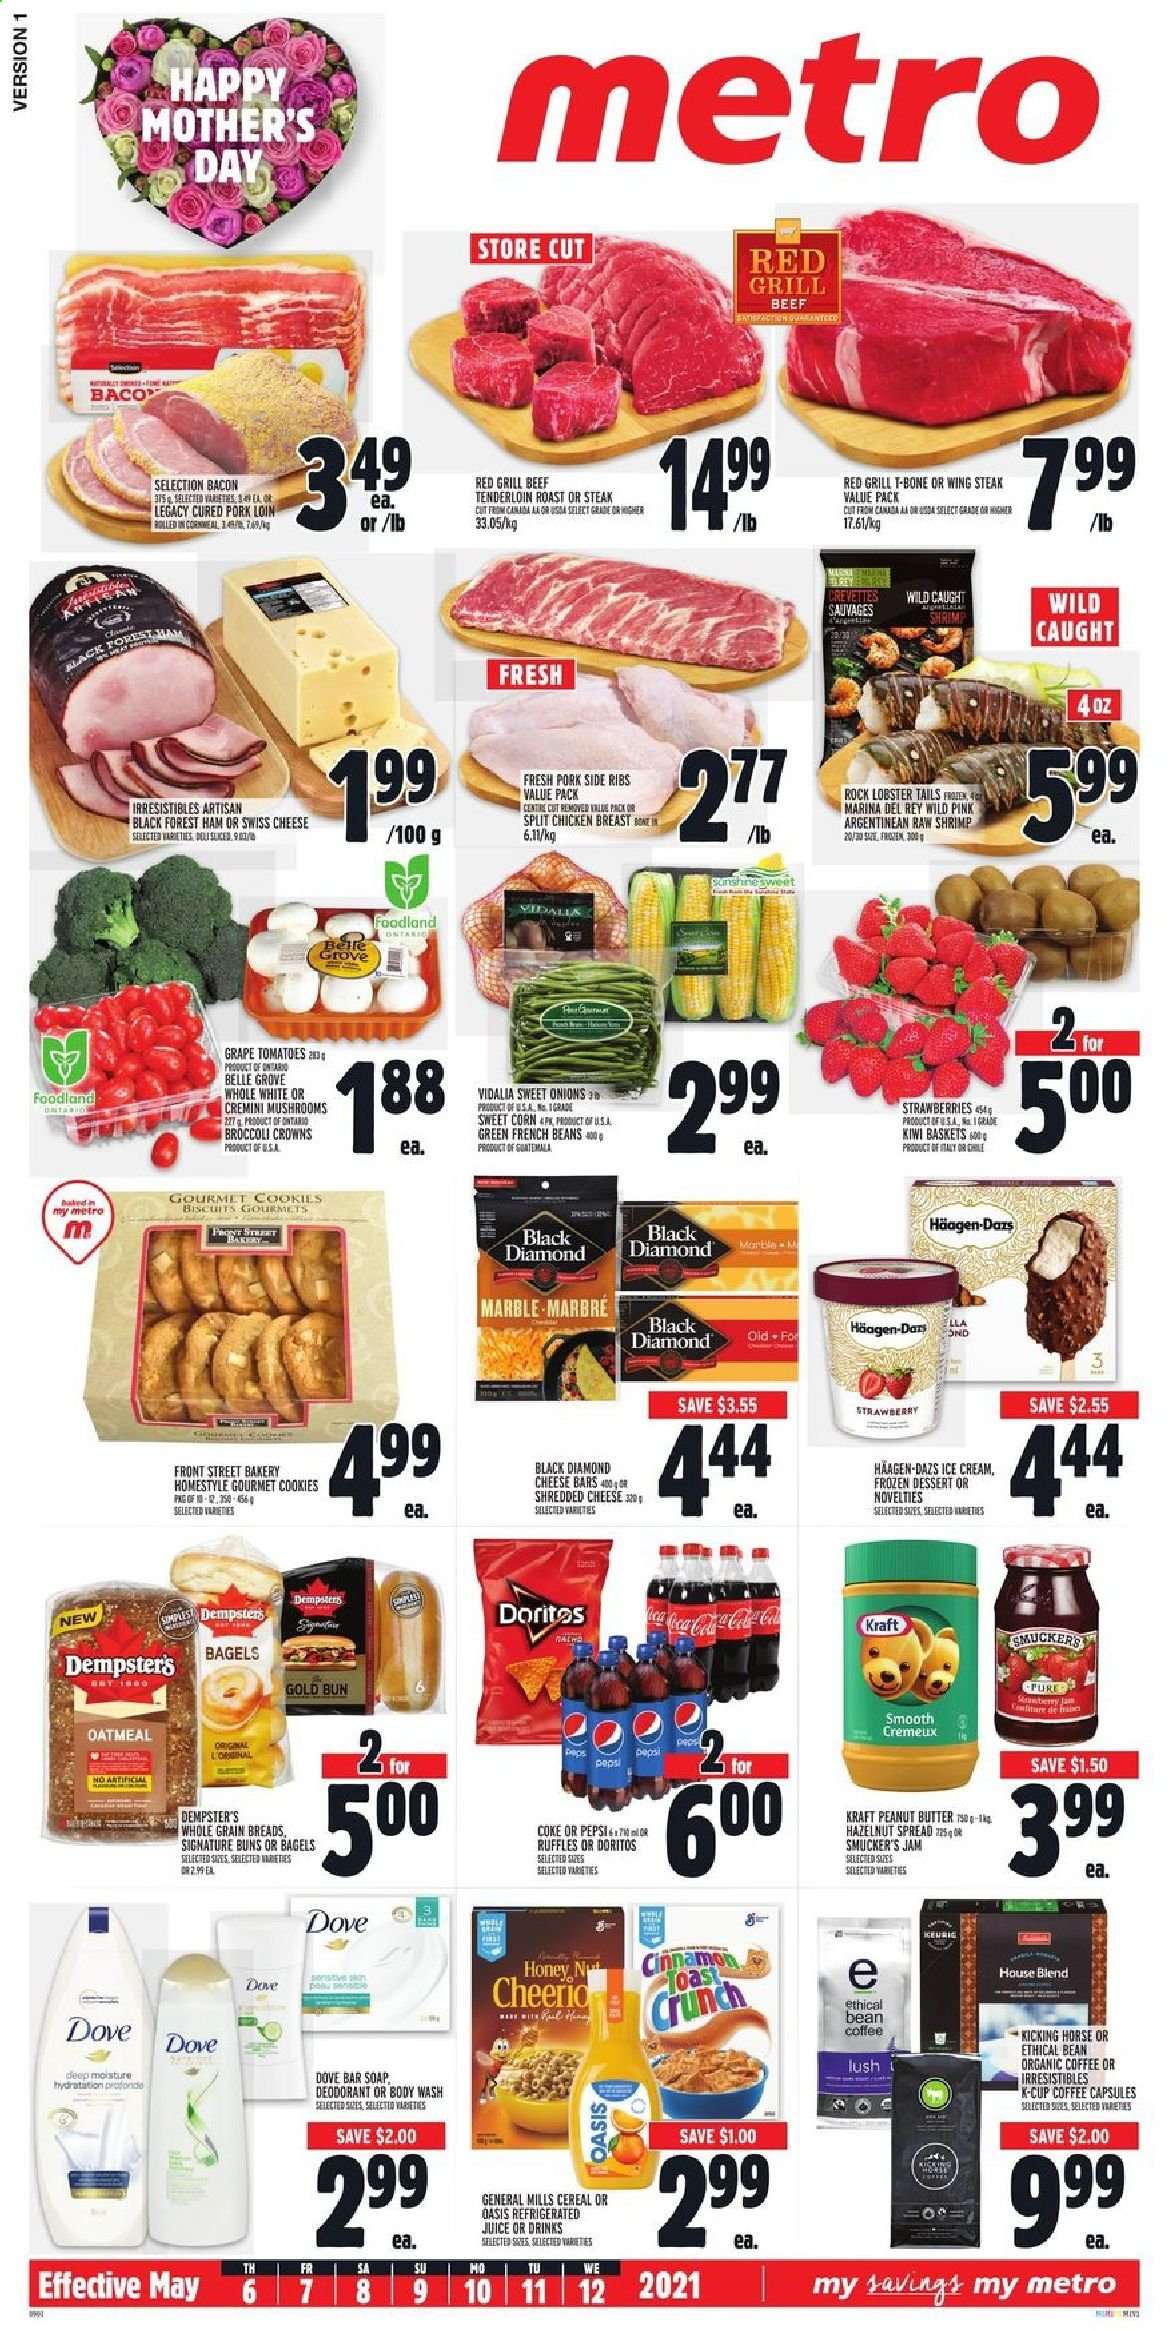 thumbnail - Metro Flyer - May 06, 2021 - May 12, 2021 - Sales products - mushrooms, bagels, buns, corn, french beans, tomatoes, strawberries, lobster, lobster tail, shrimps, Kraft®, bacon, ham, shredded cheese, swiss cheese, ice cream, Häagen-Dazs, cookies, biscuit, Doritos, Ruffles, oatmeal, cereals, cinnamon, honey, fruit jam, peanut butter, hazelnut spread, Coca-Cola, Pepsi, juice, organic coffee, coffee capsules, K-Cups, chicken breasts, chicken, beef meat, t-bone steak, beef tenderloin, pork loin, pork meat, body wash, soap bar, soap, anti-perspirant, Ethical, steak, deodorant. Page 1.